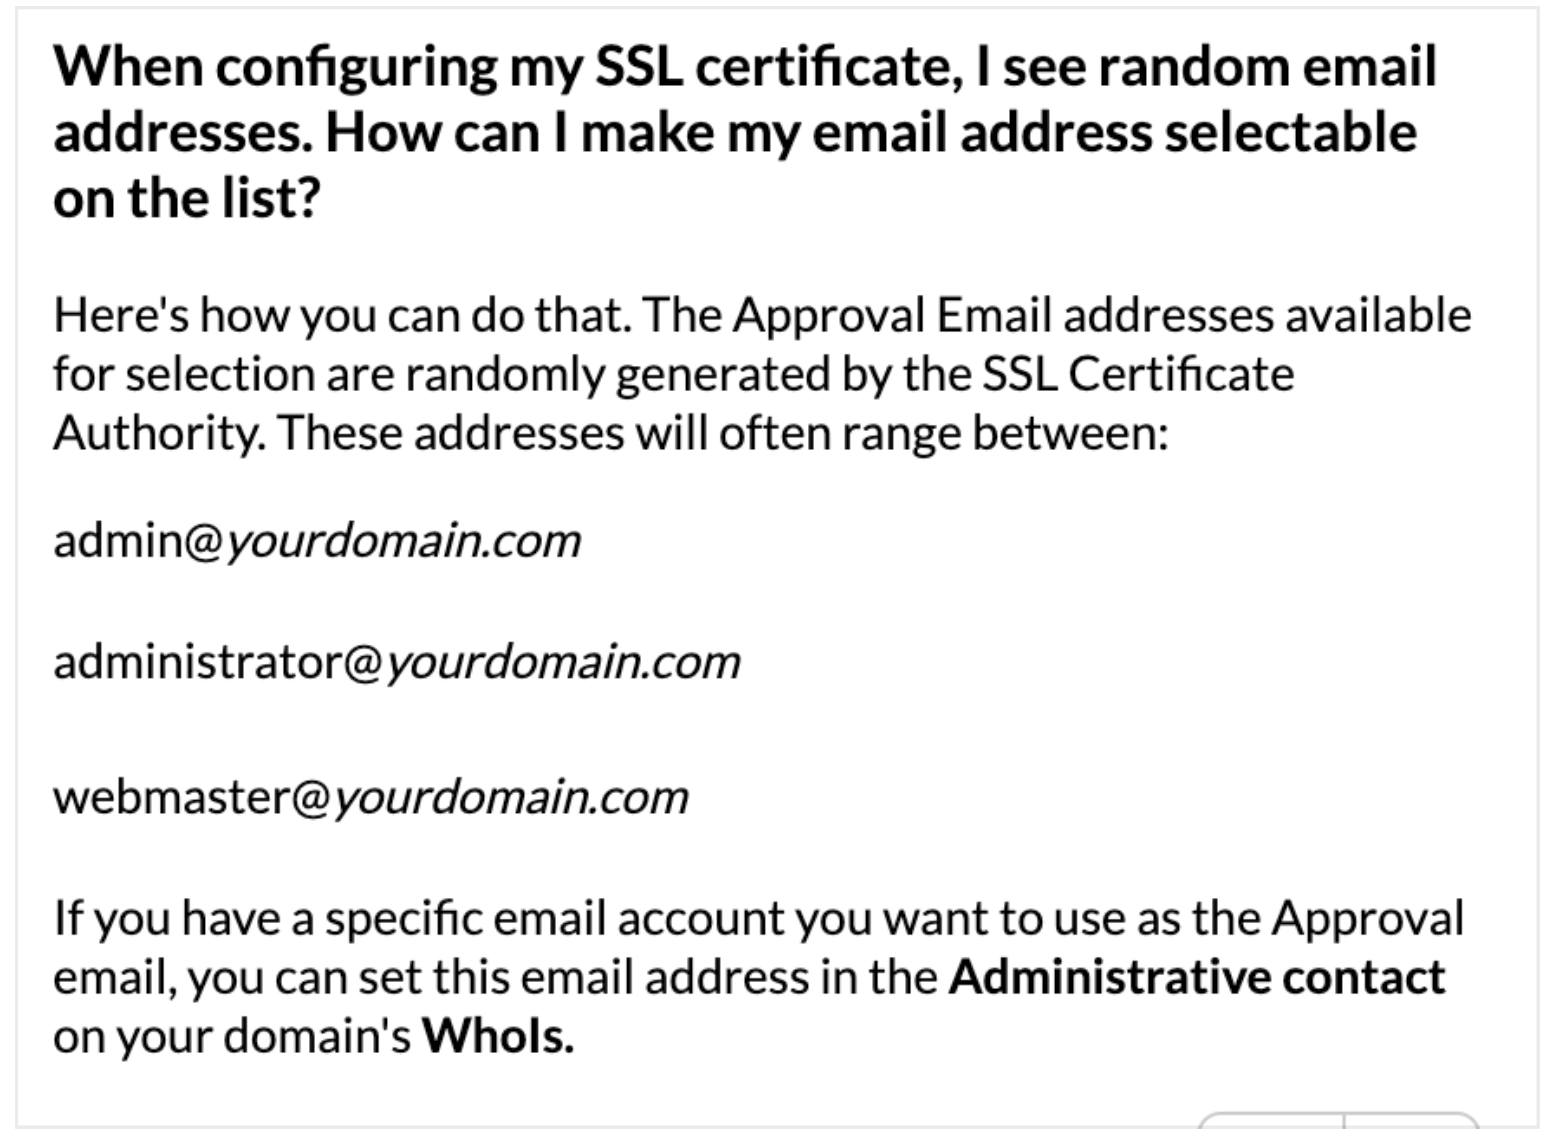 SSL Approval Email Change